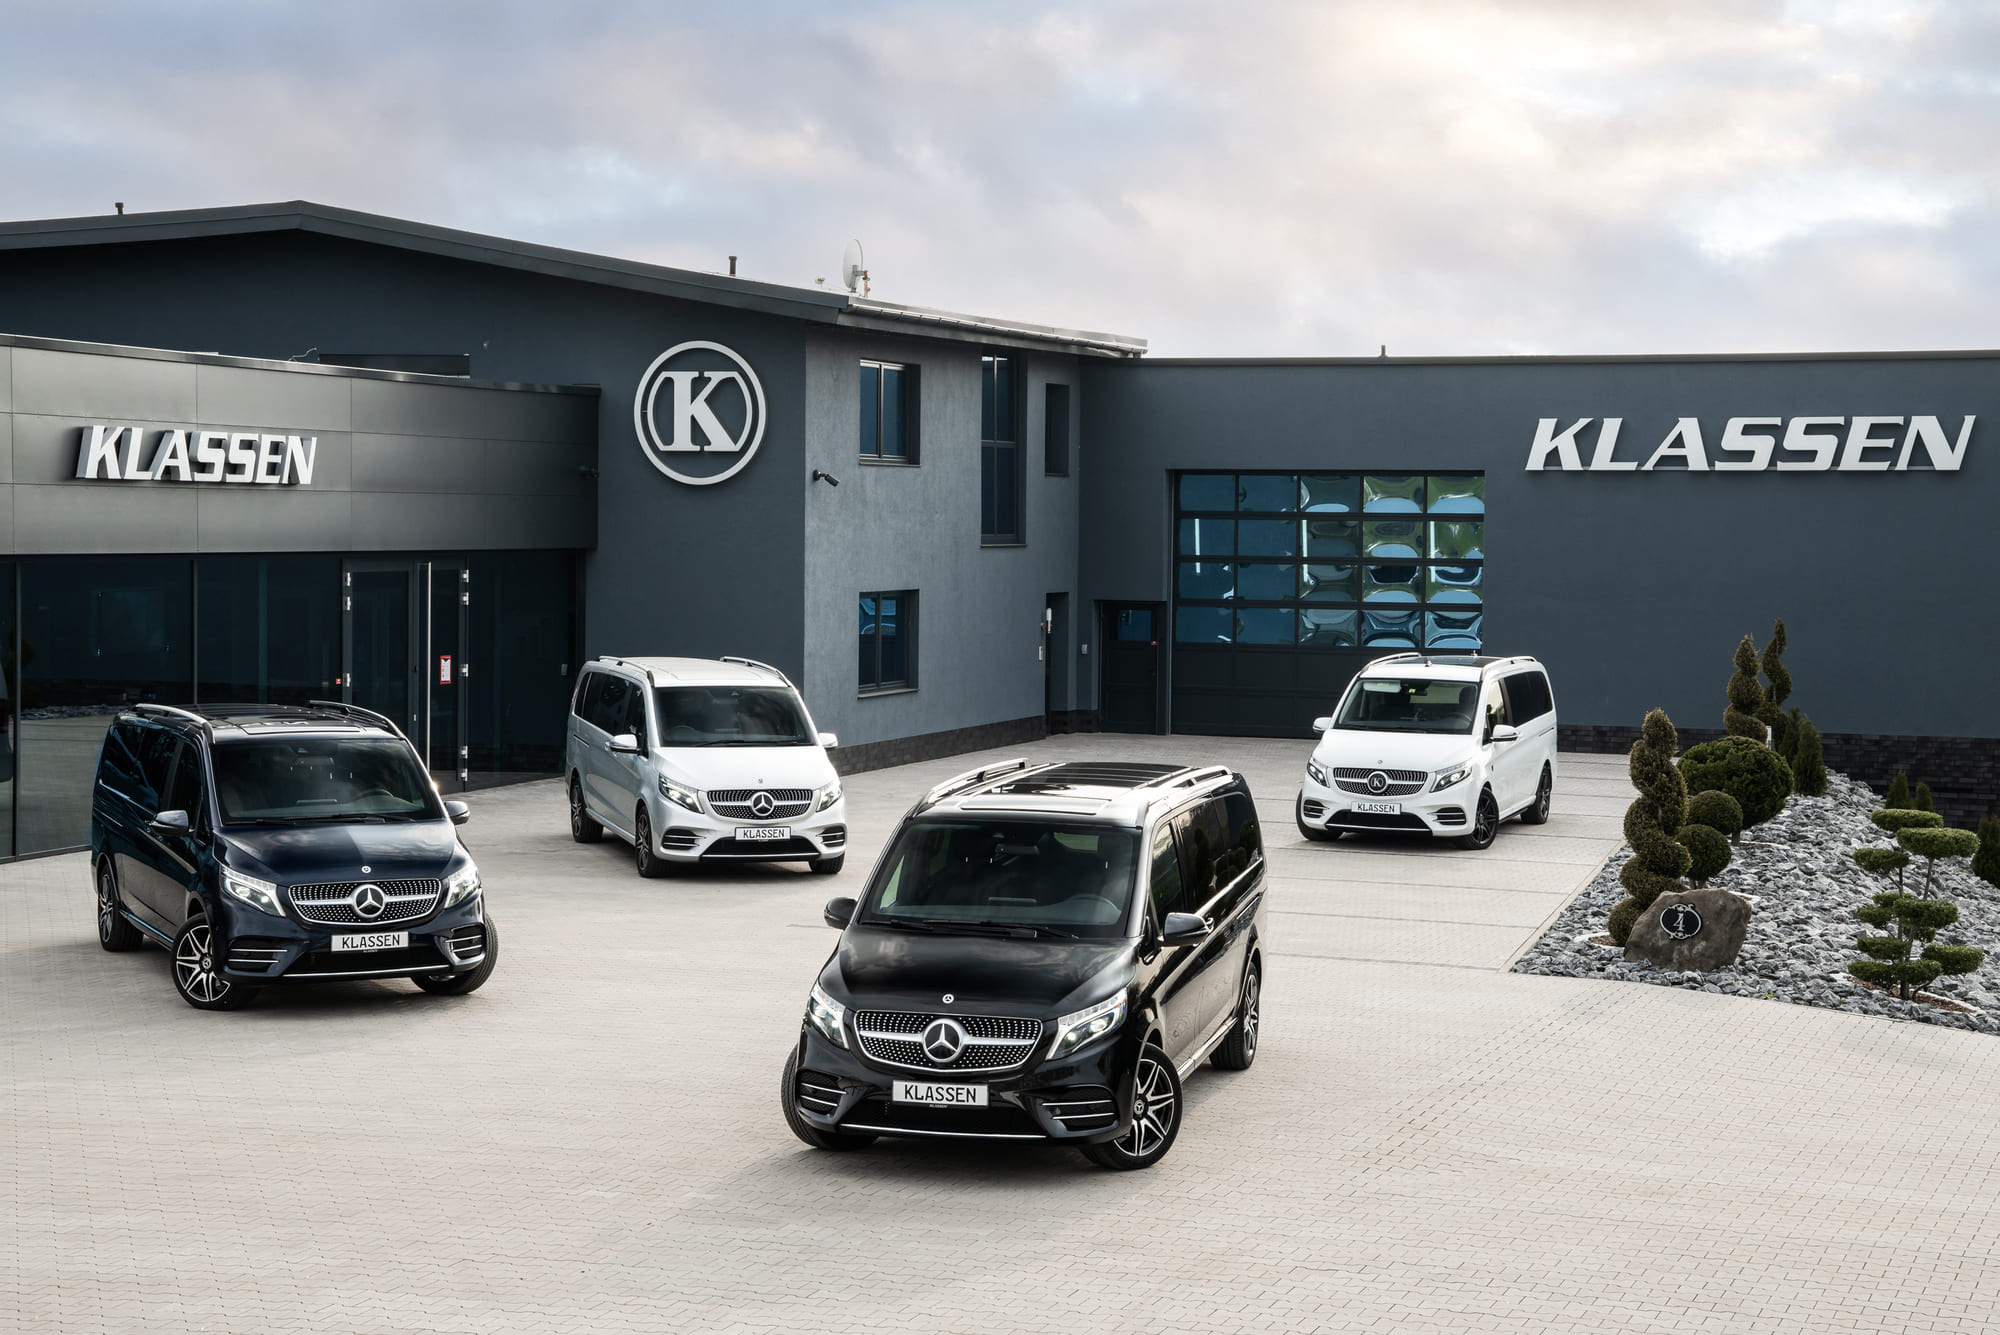 KLASSEN Luxury VIP Cars and Vans - Armored and Stretched Cars